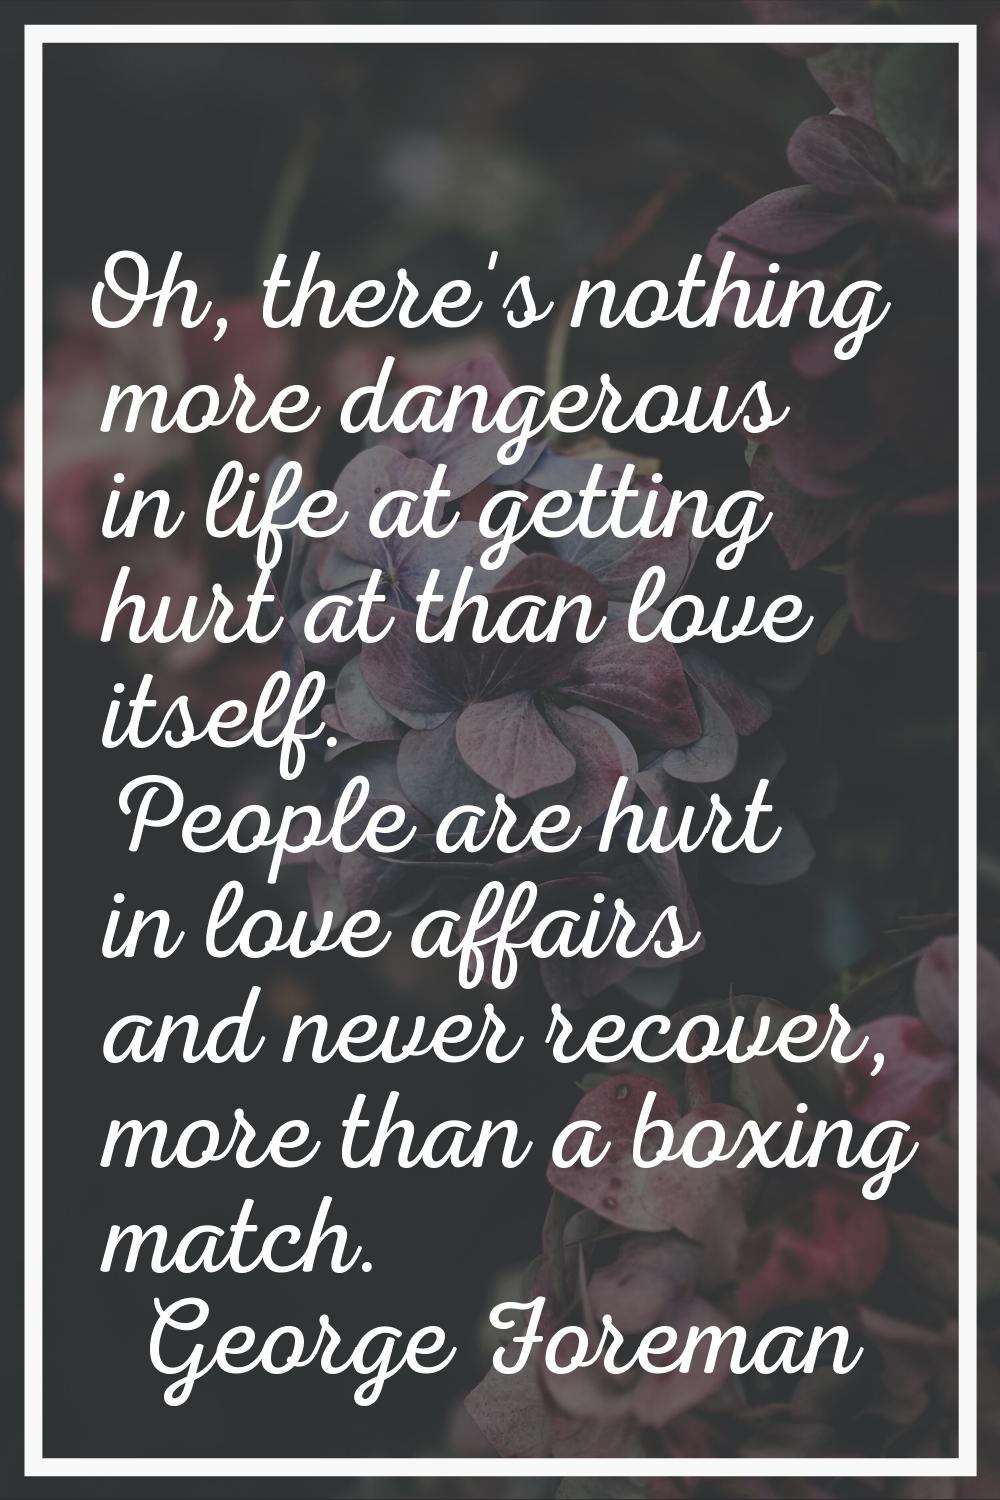 Oh, there's nothing more dangerous in life at getting hurt at than love itself. People are hurt in 